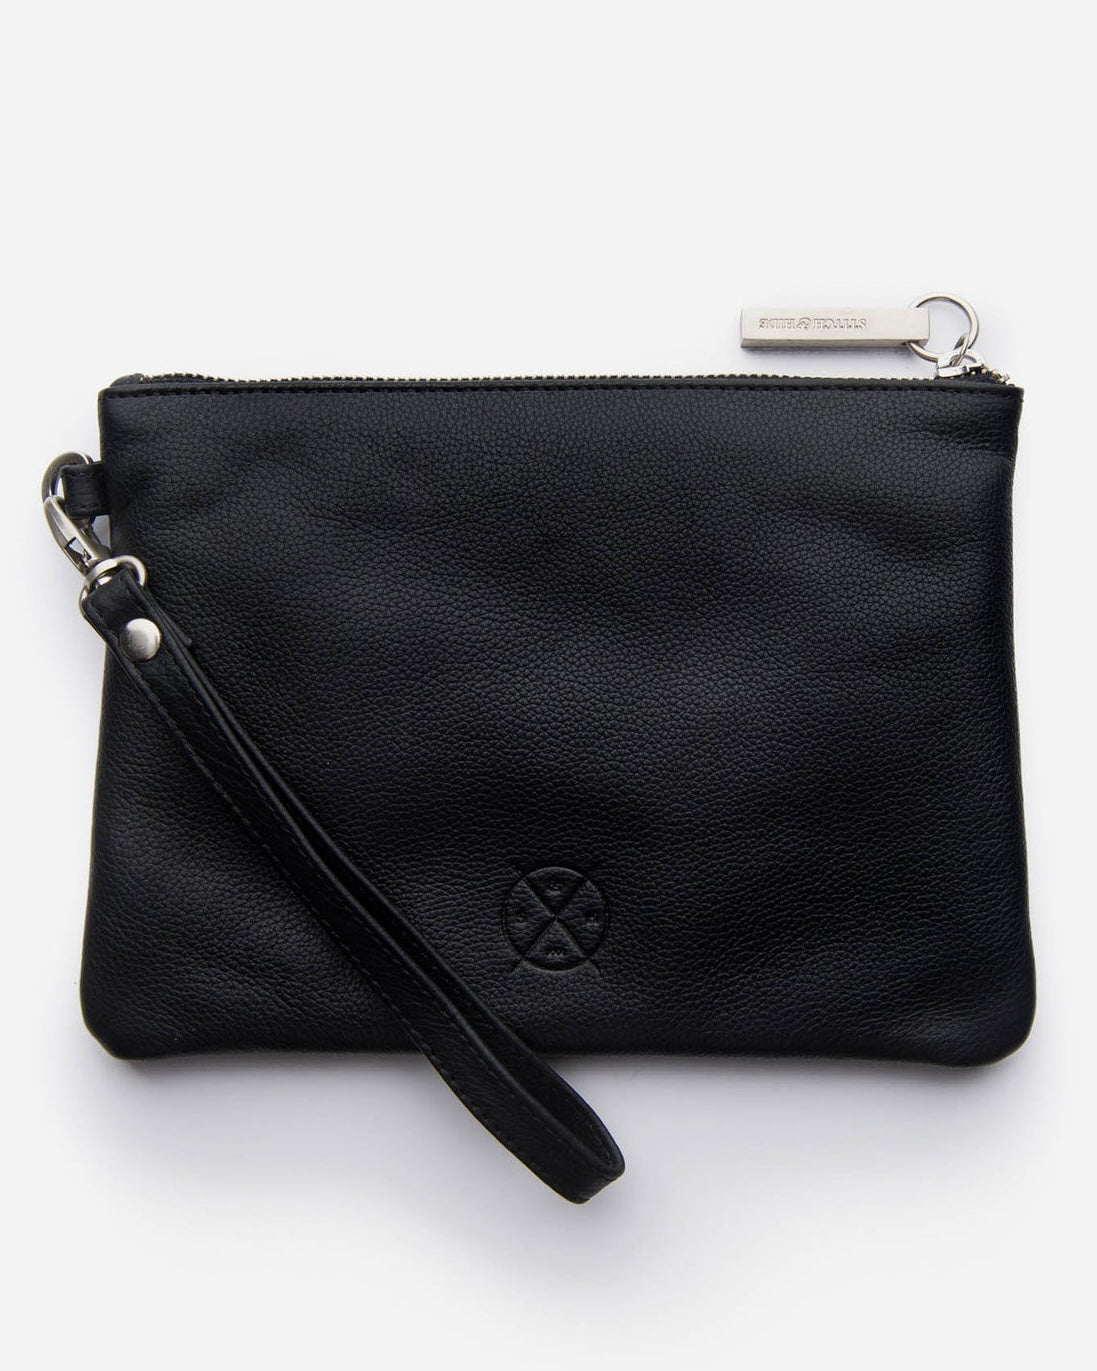 stitch and hide, cassie clutch, leather, leather clutch